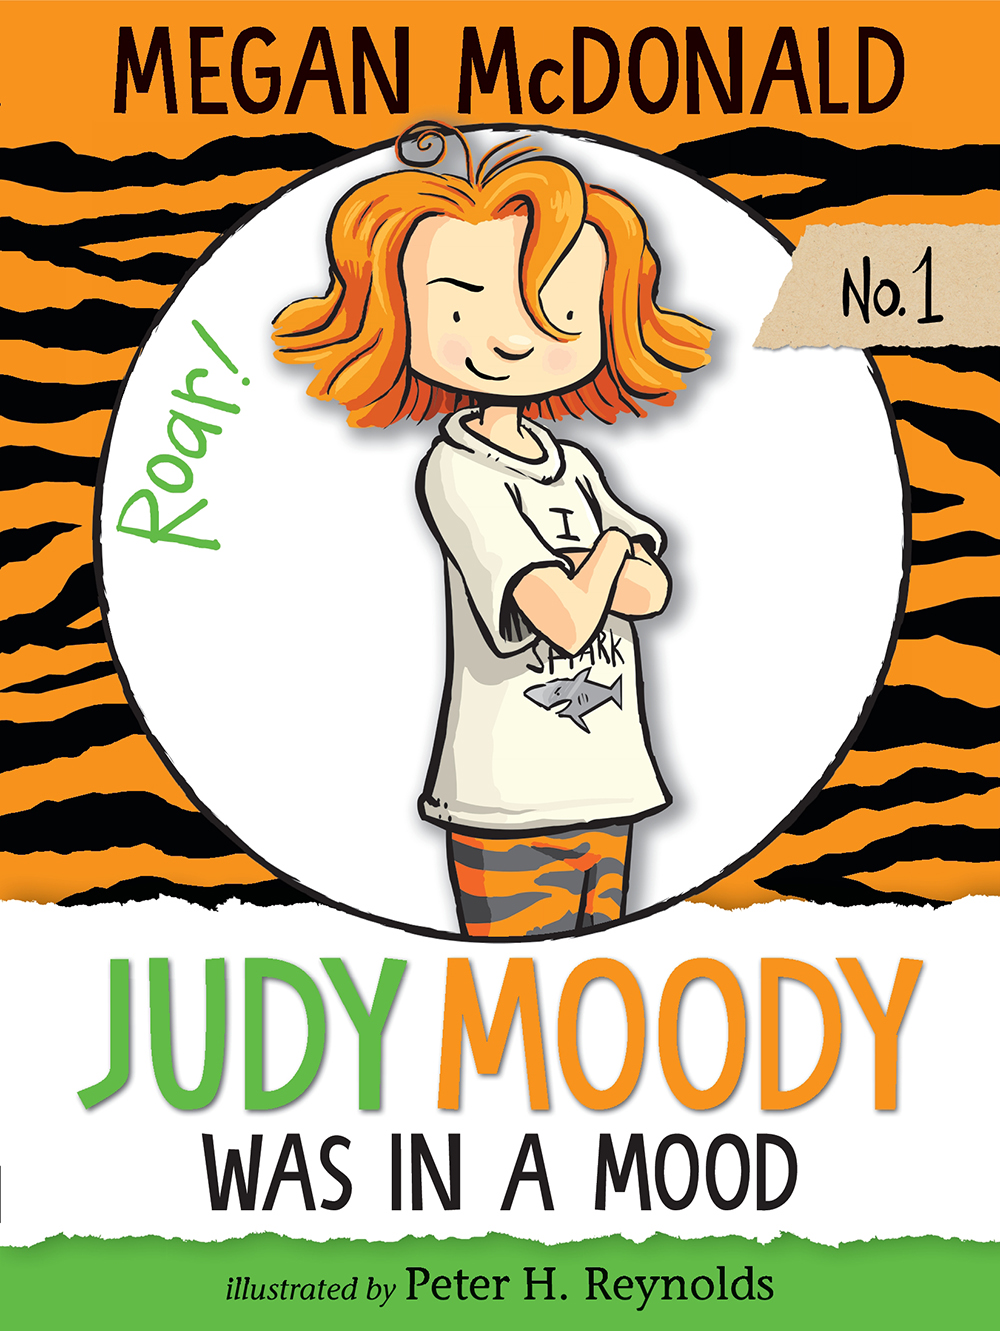 Judy Moody book cover with tiger print